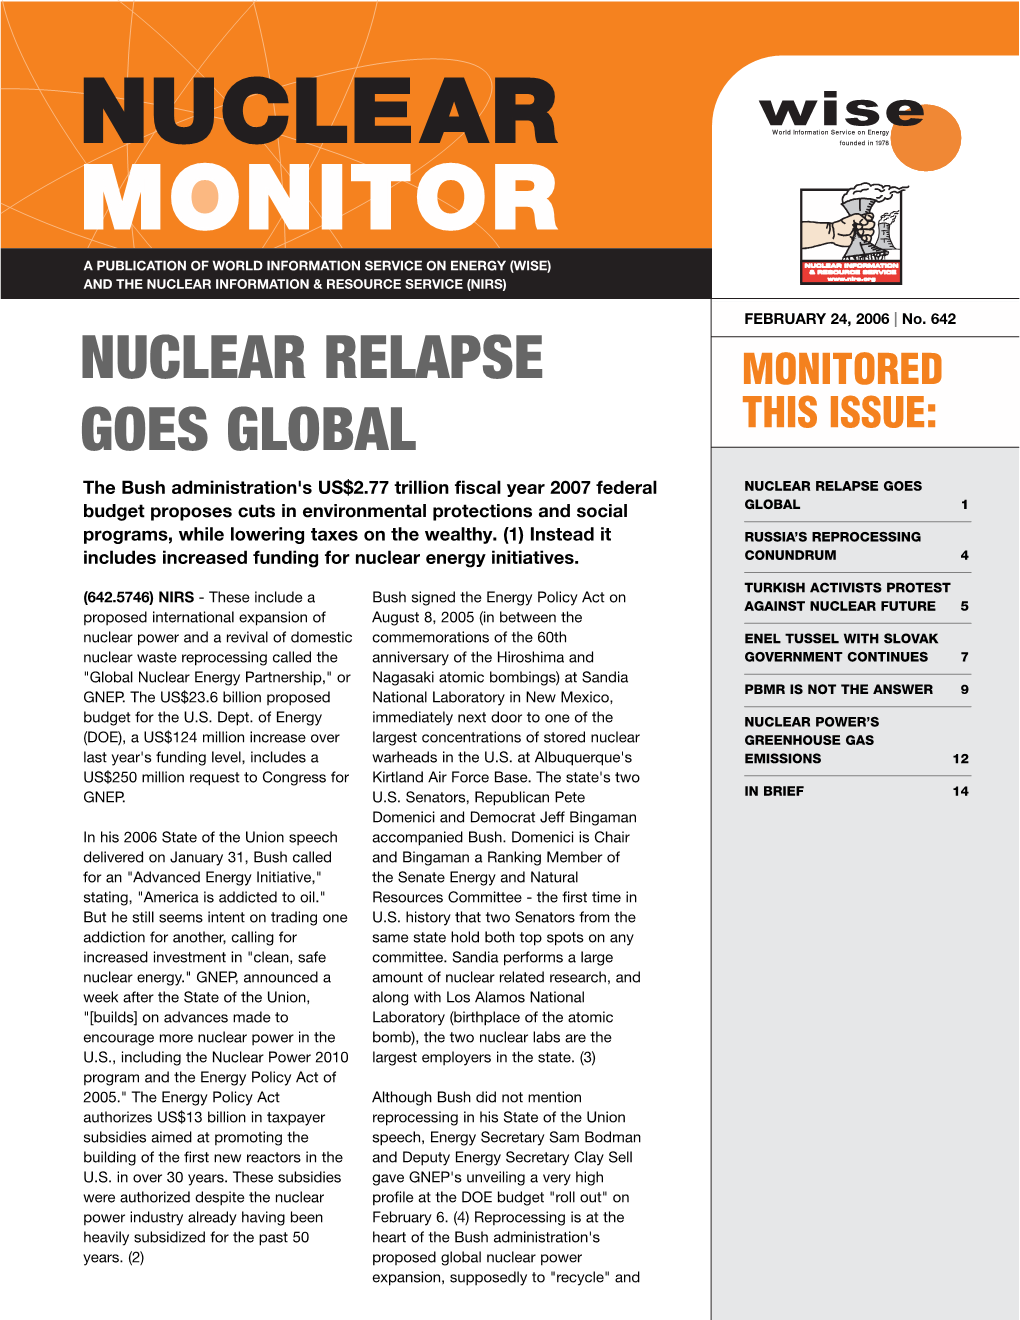 Nuclear Relapse Goes Global